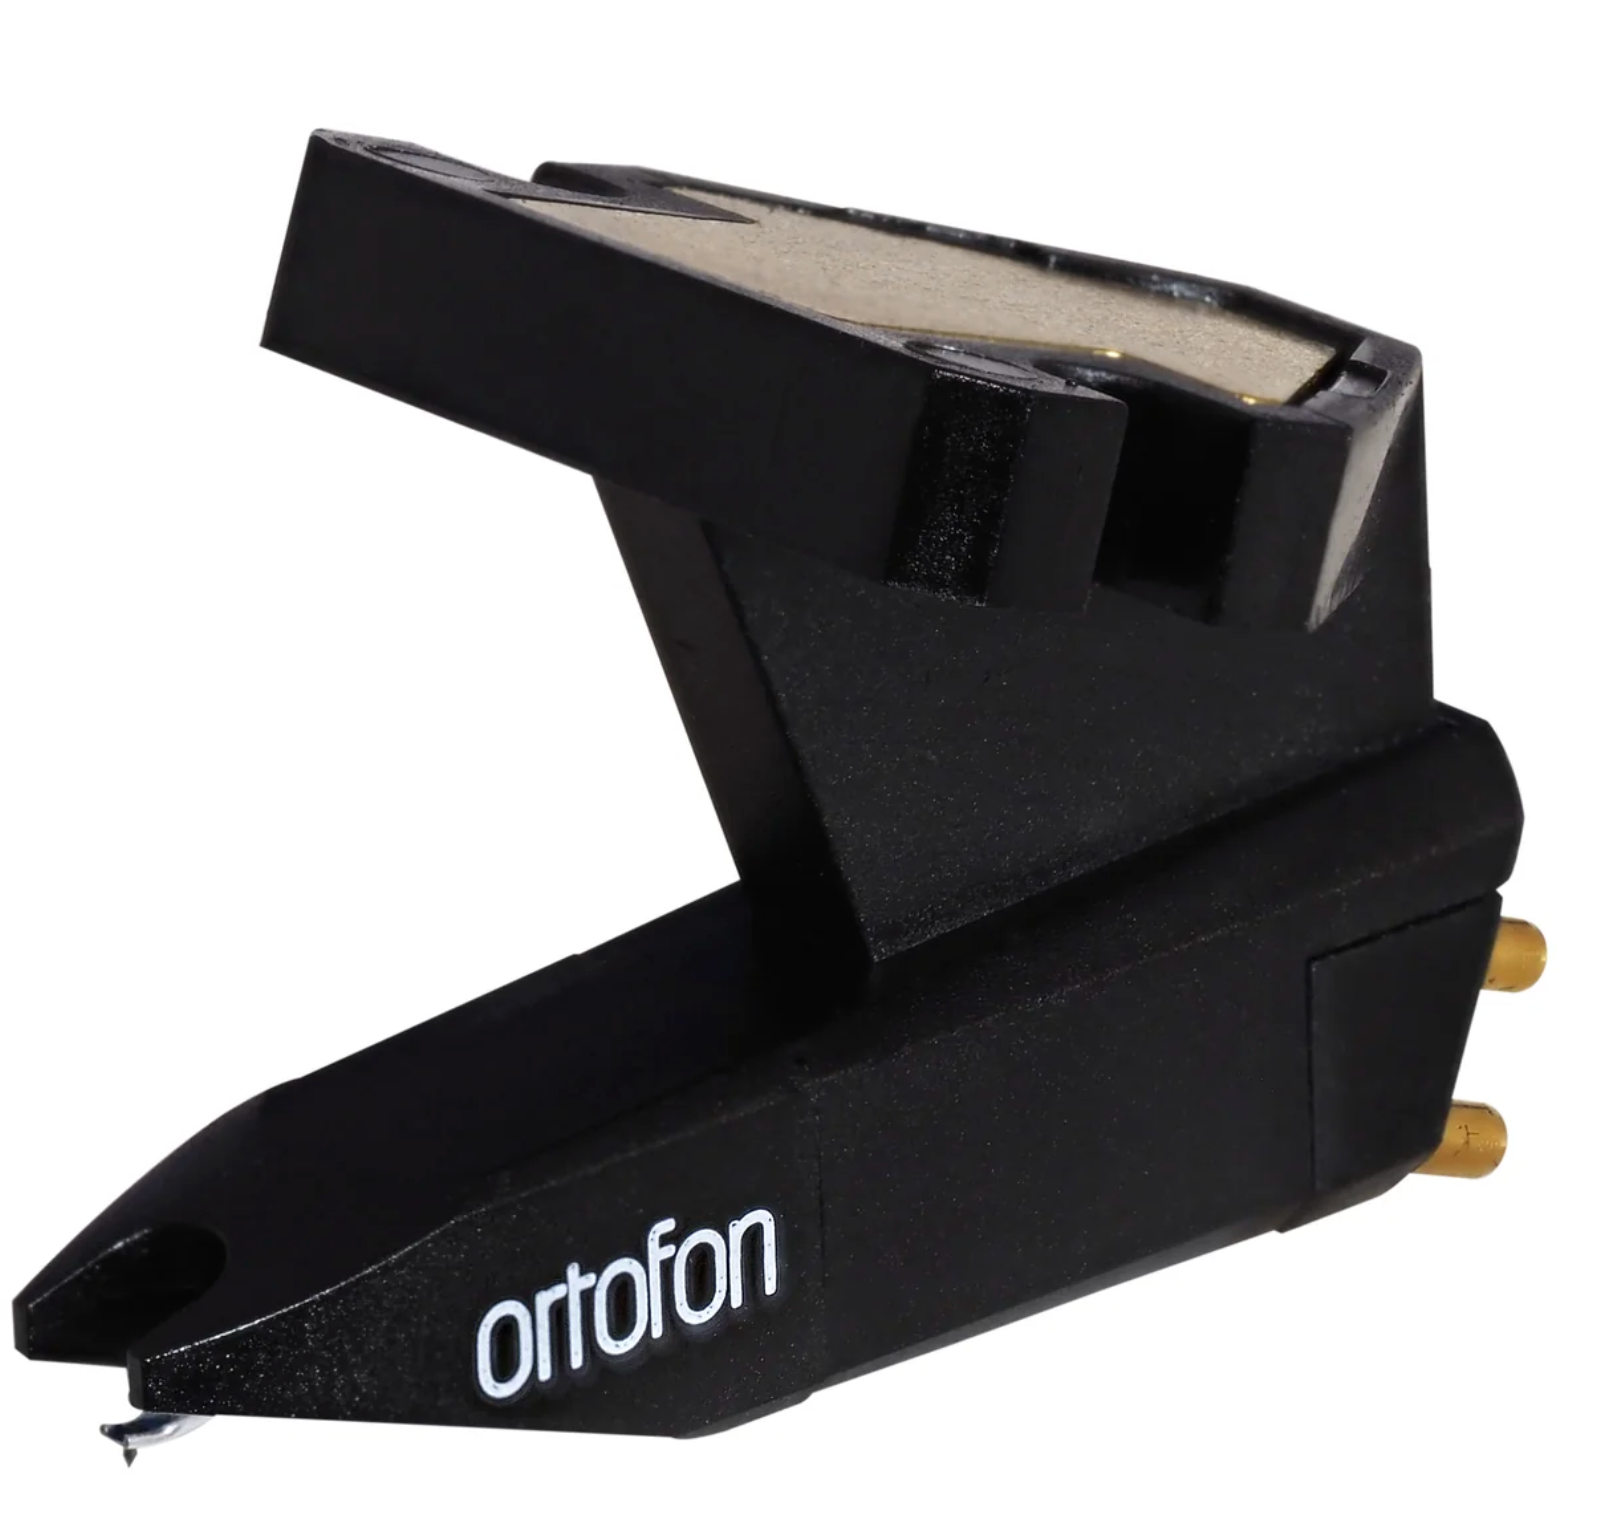 Ortofon Hi-Fi OM 5 S Moving Magnet Cartridge. Images showing pins and stylis